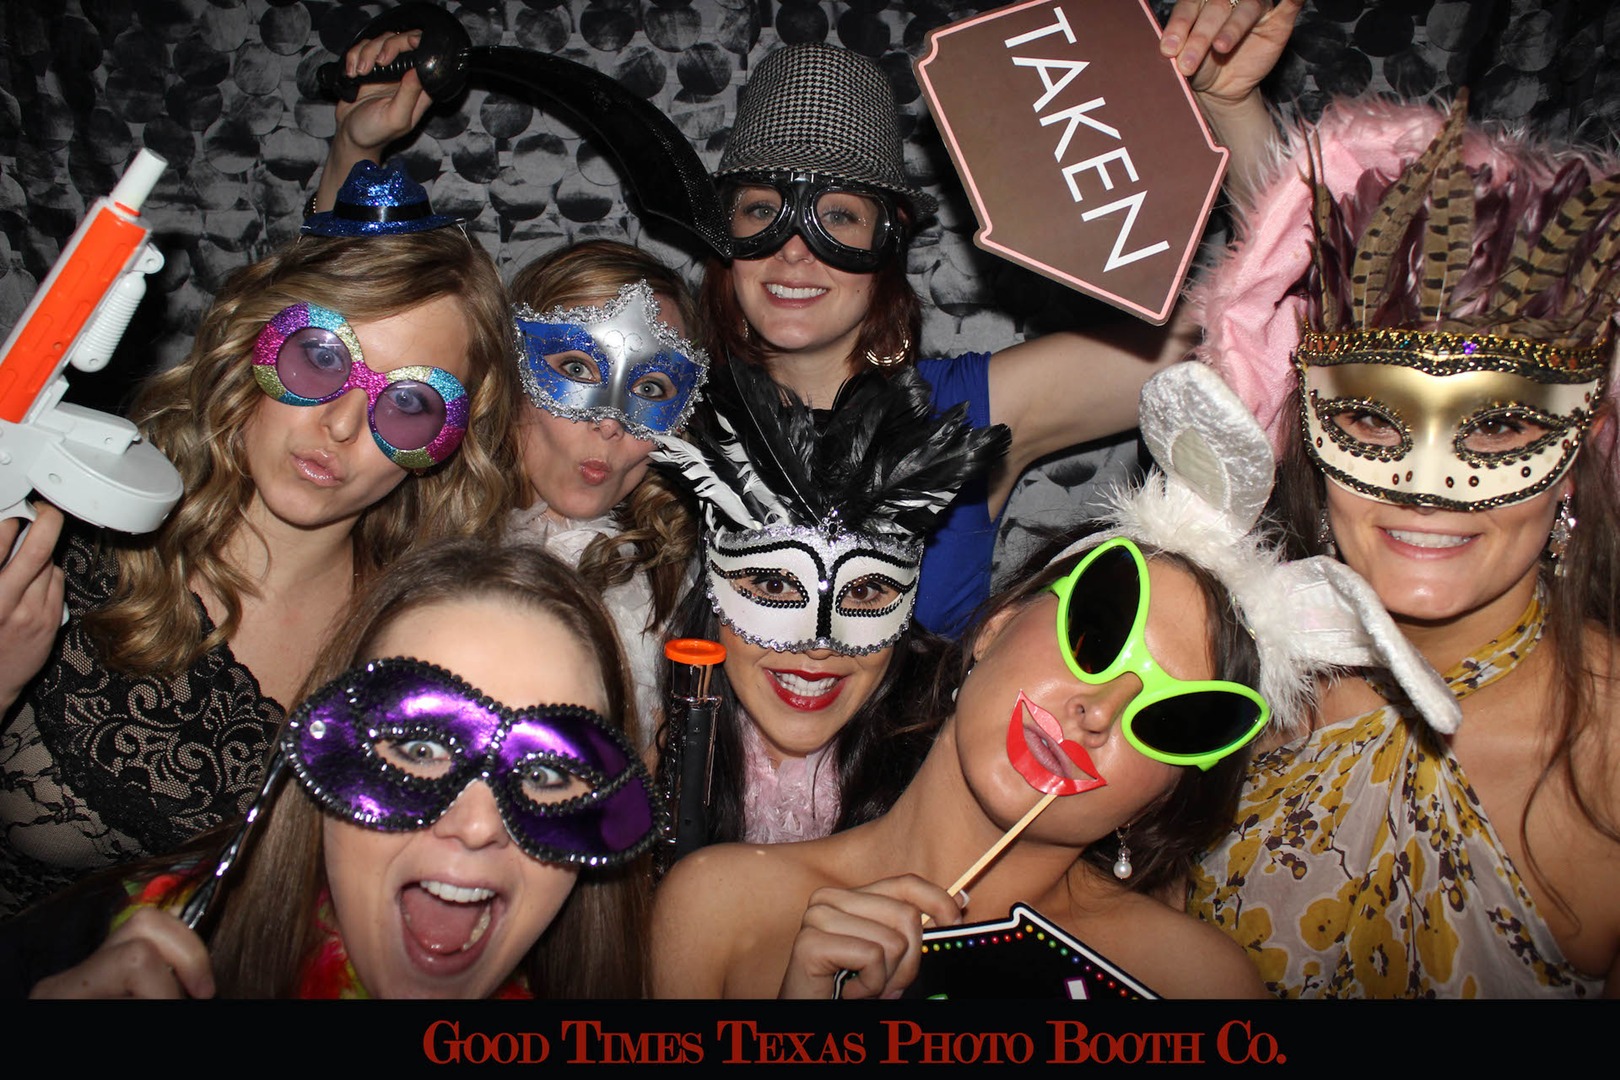 Good Times TX Photo Booth